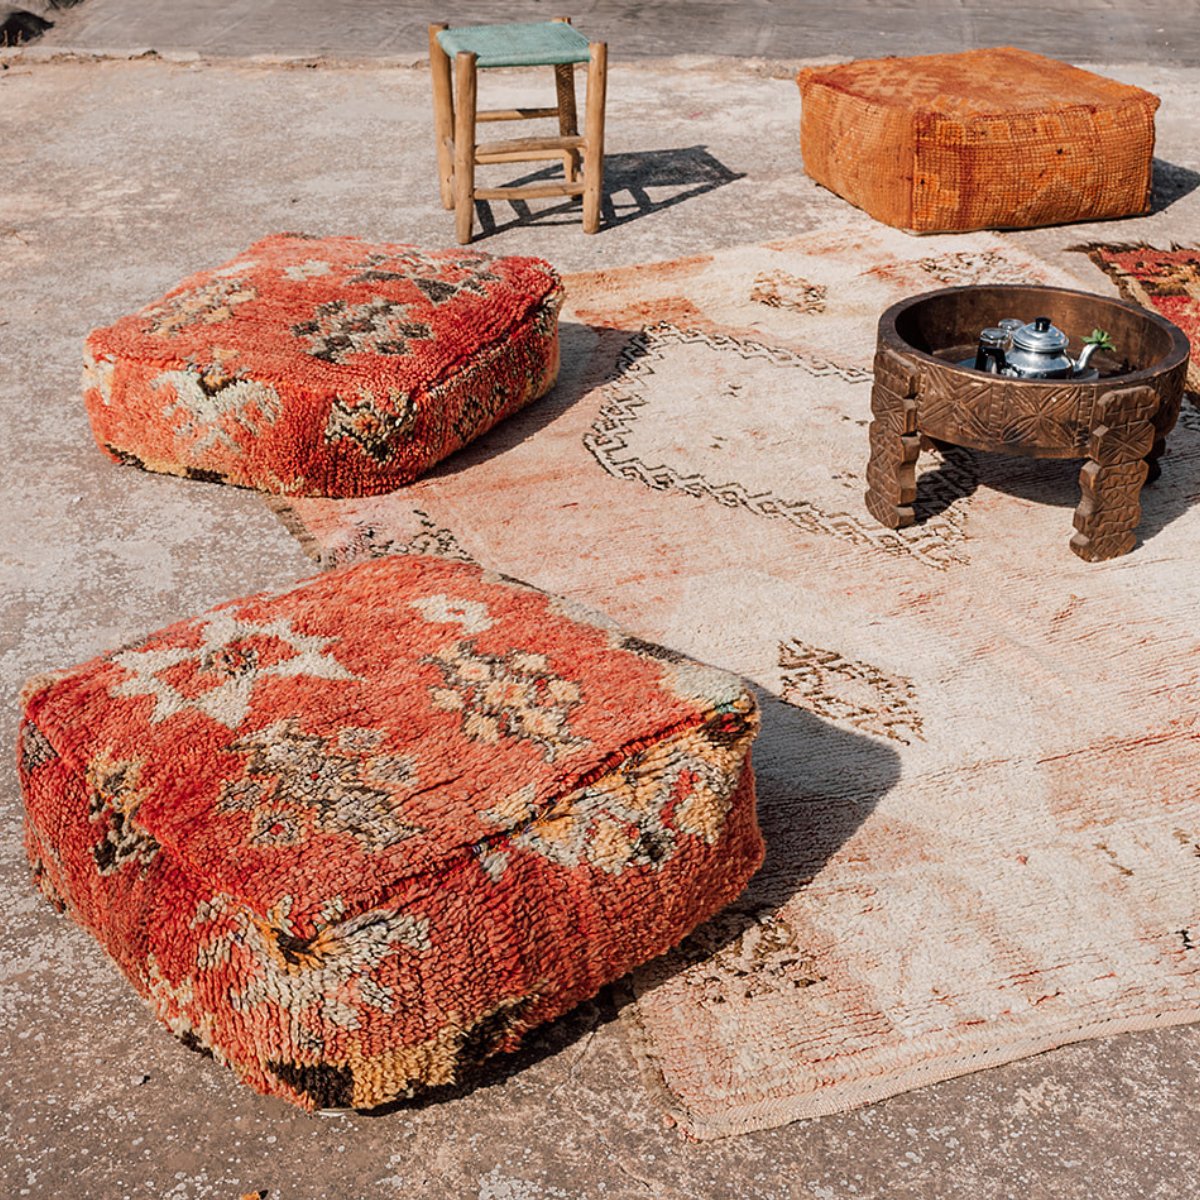 Vintage Moroccan Floor Cushions scattered on the ground with vintage rugs - Nouvelle Nomad